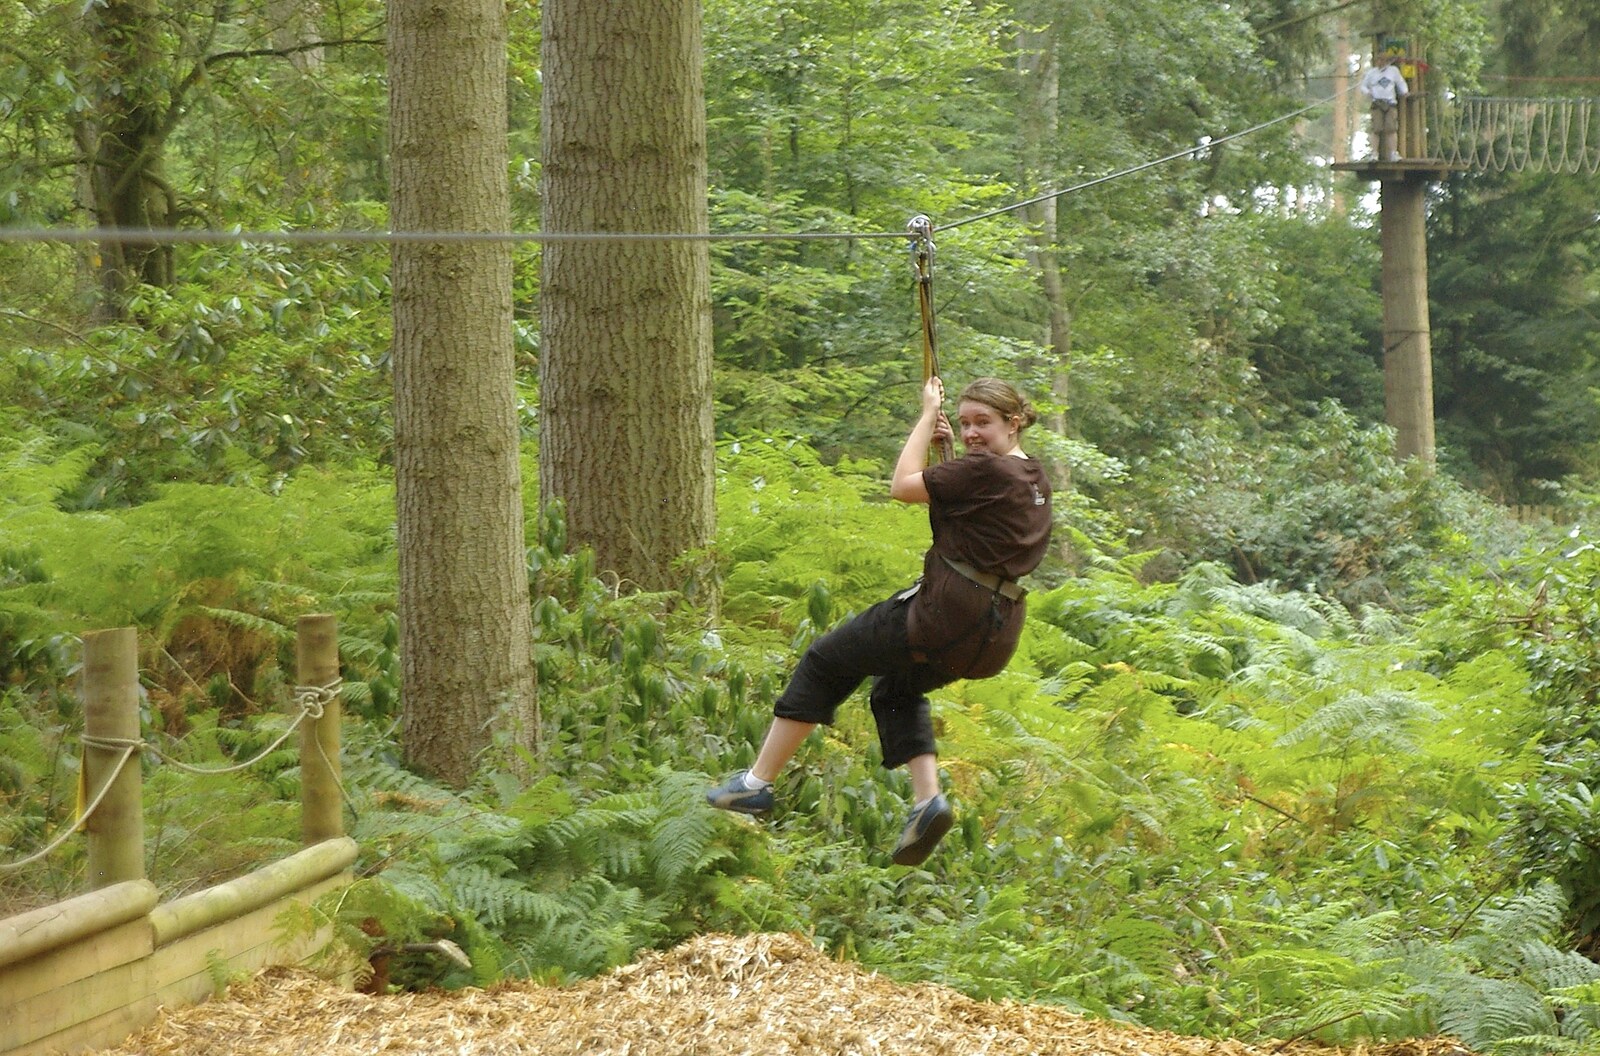 Isobel comes in to land from Qualcomm Cambridge "Go Ape", High Lodge, Thetford Forest - 27th July 2006